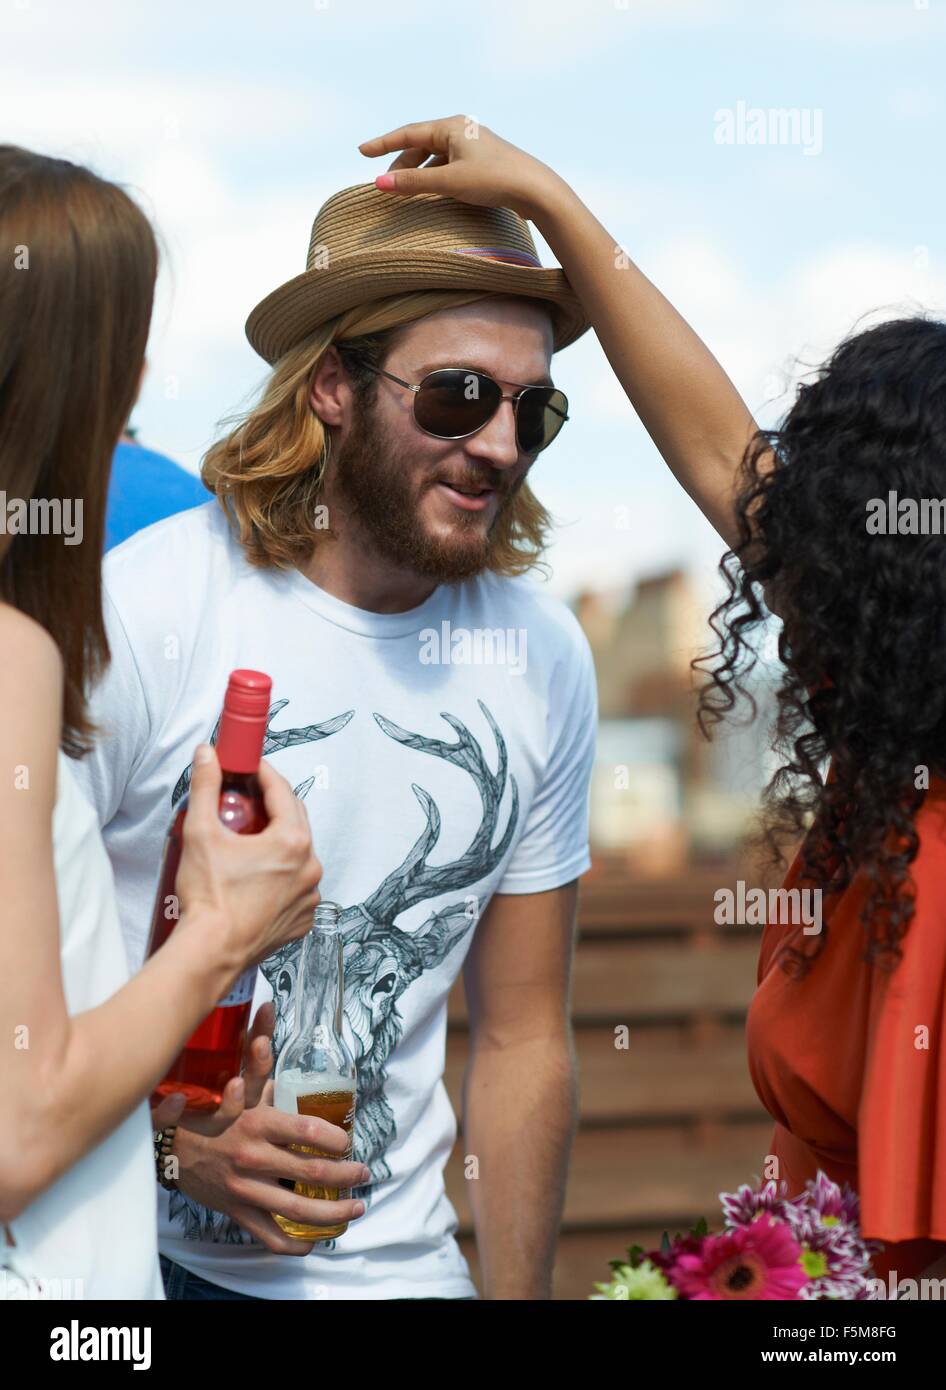 Woman putting straw hat on male friend at rooftop party Stock Photo